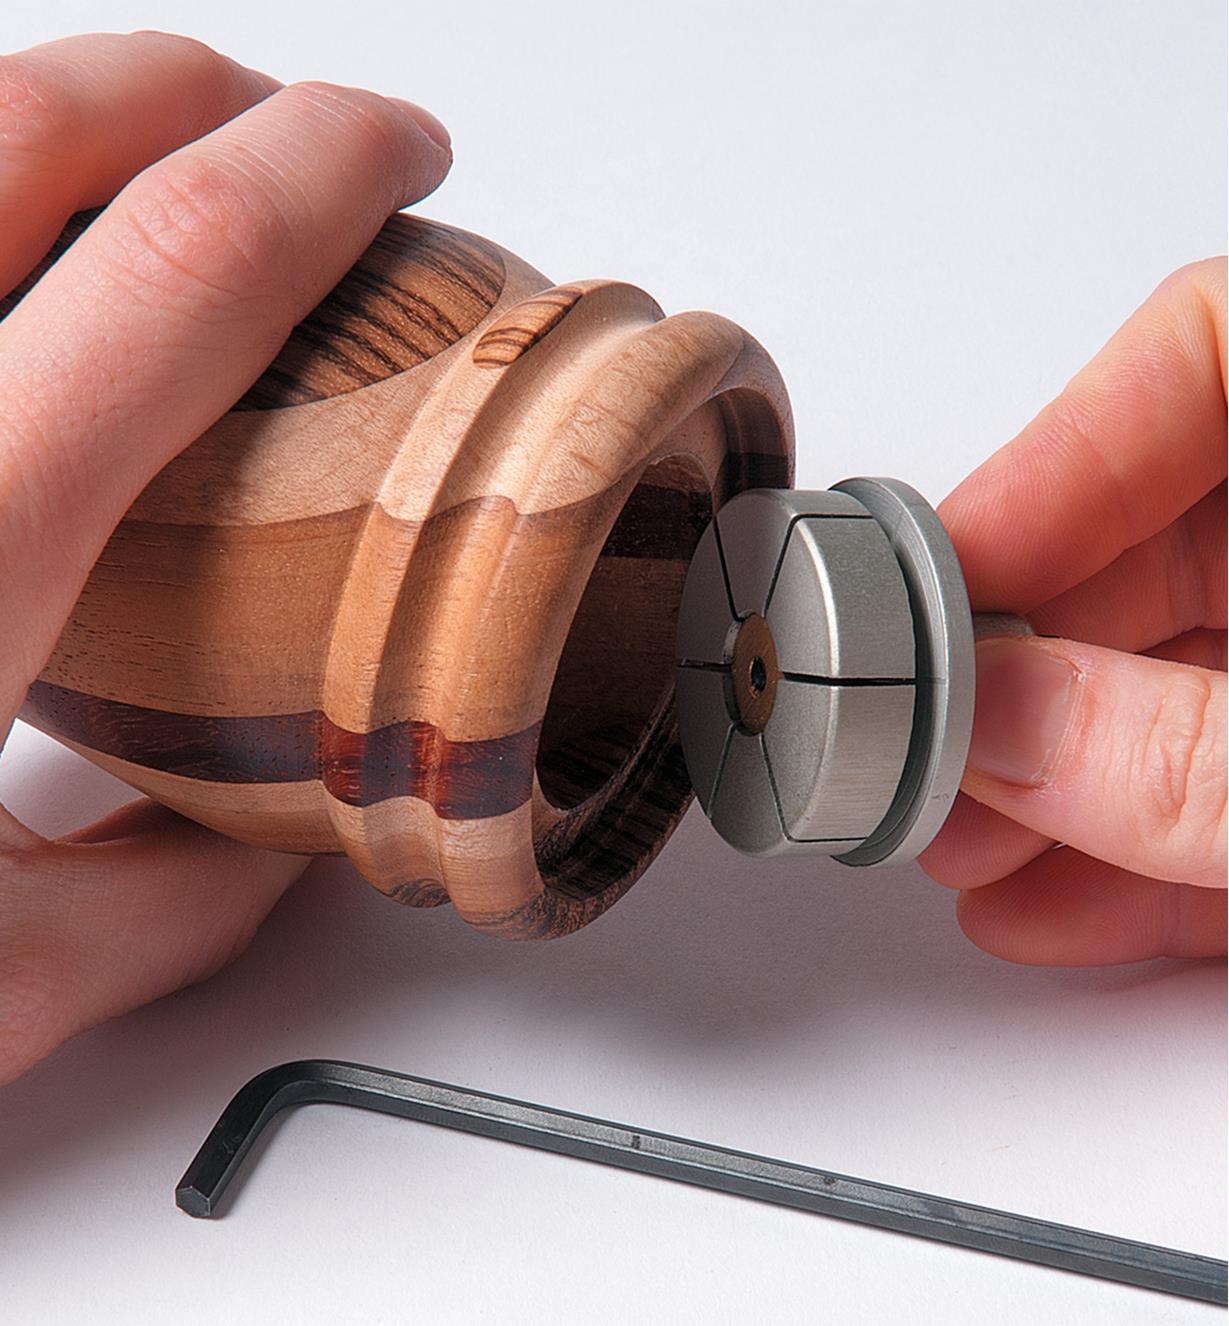 Fitting a collet into a recess in a wooden project